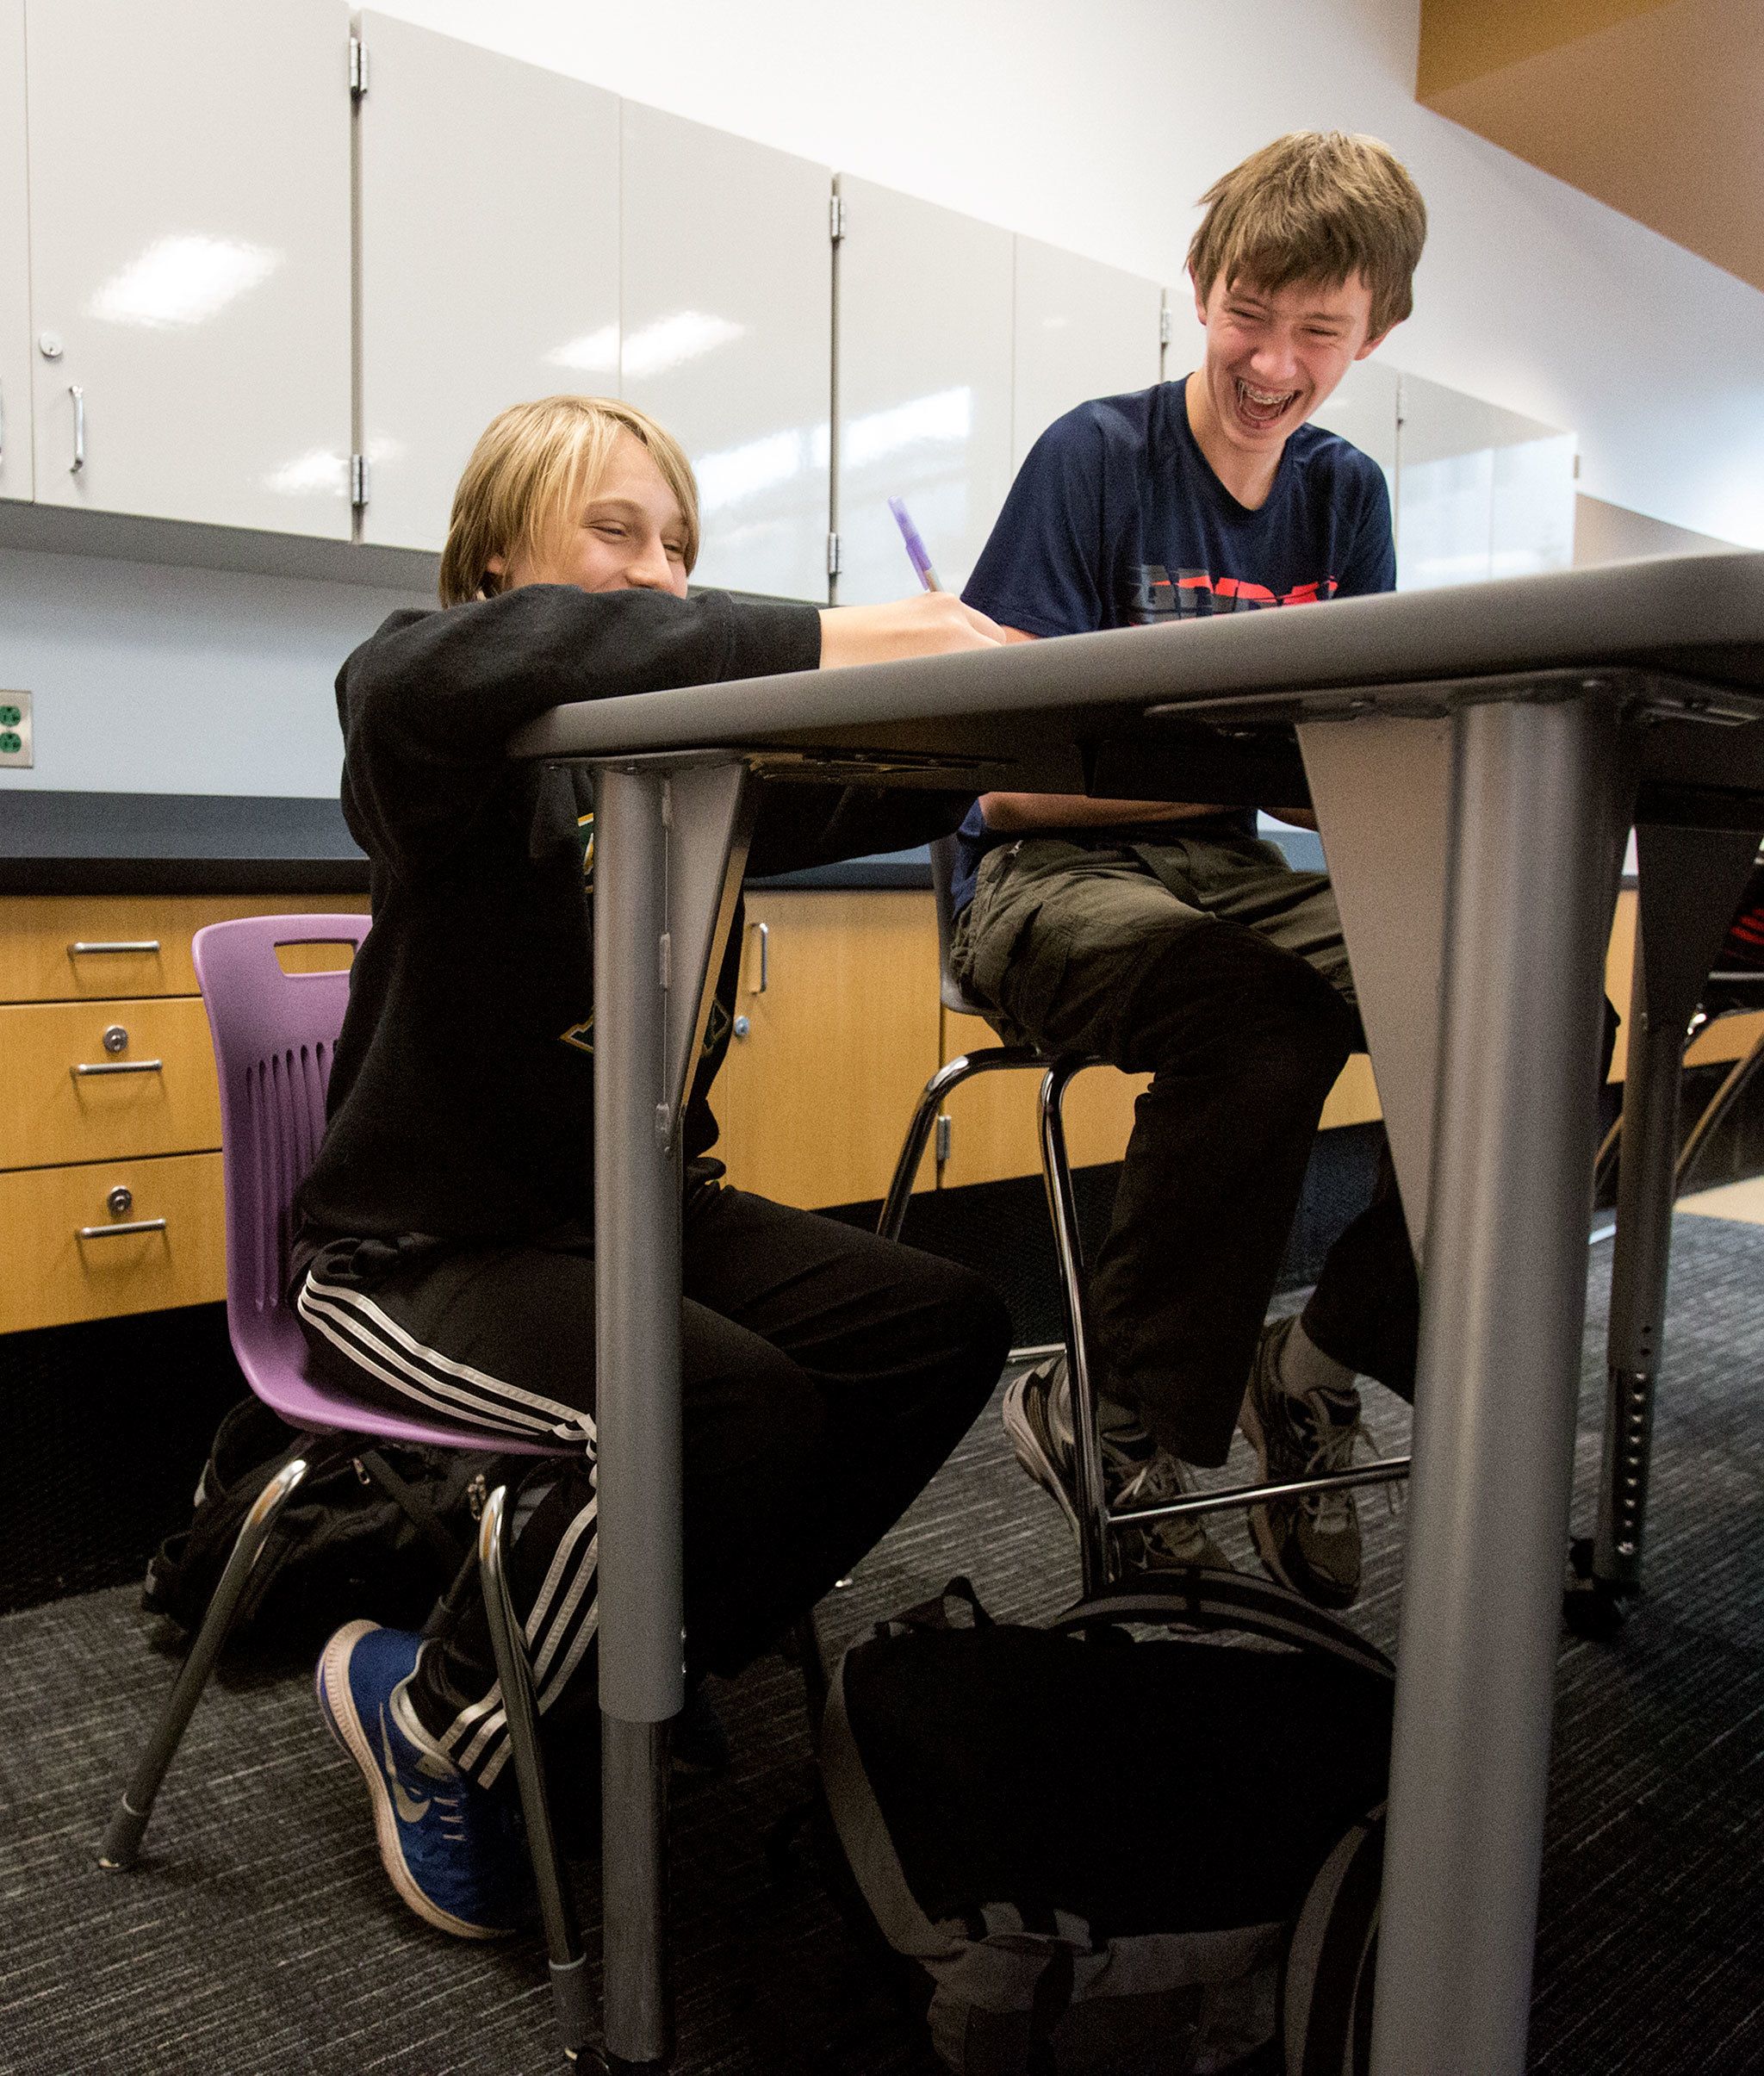 Leota Junior High eighth graders Elliott Tobin (left) and Jake Mullins laugh as they test out different chairs and desks at North Creek High School on Wednesday in Bothell. The students tested and graded three different sets of chairs and desks that the Northshore School District may purchase for the new high school. (Andy Bronson / The Herald)